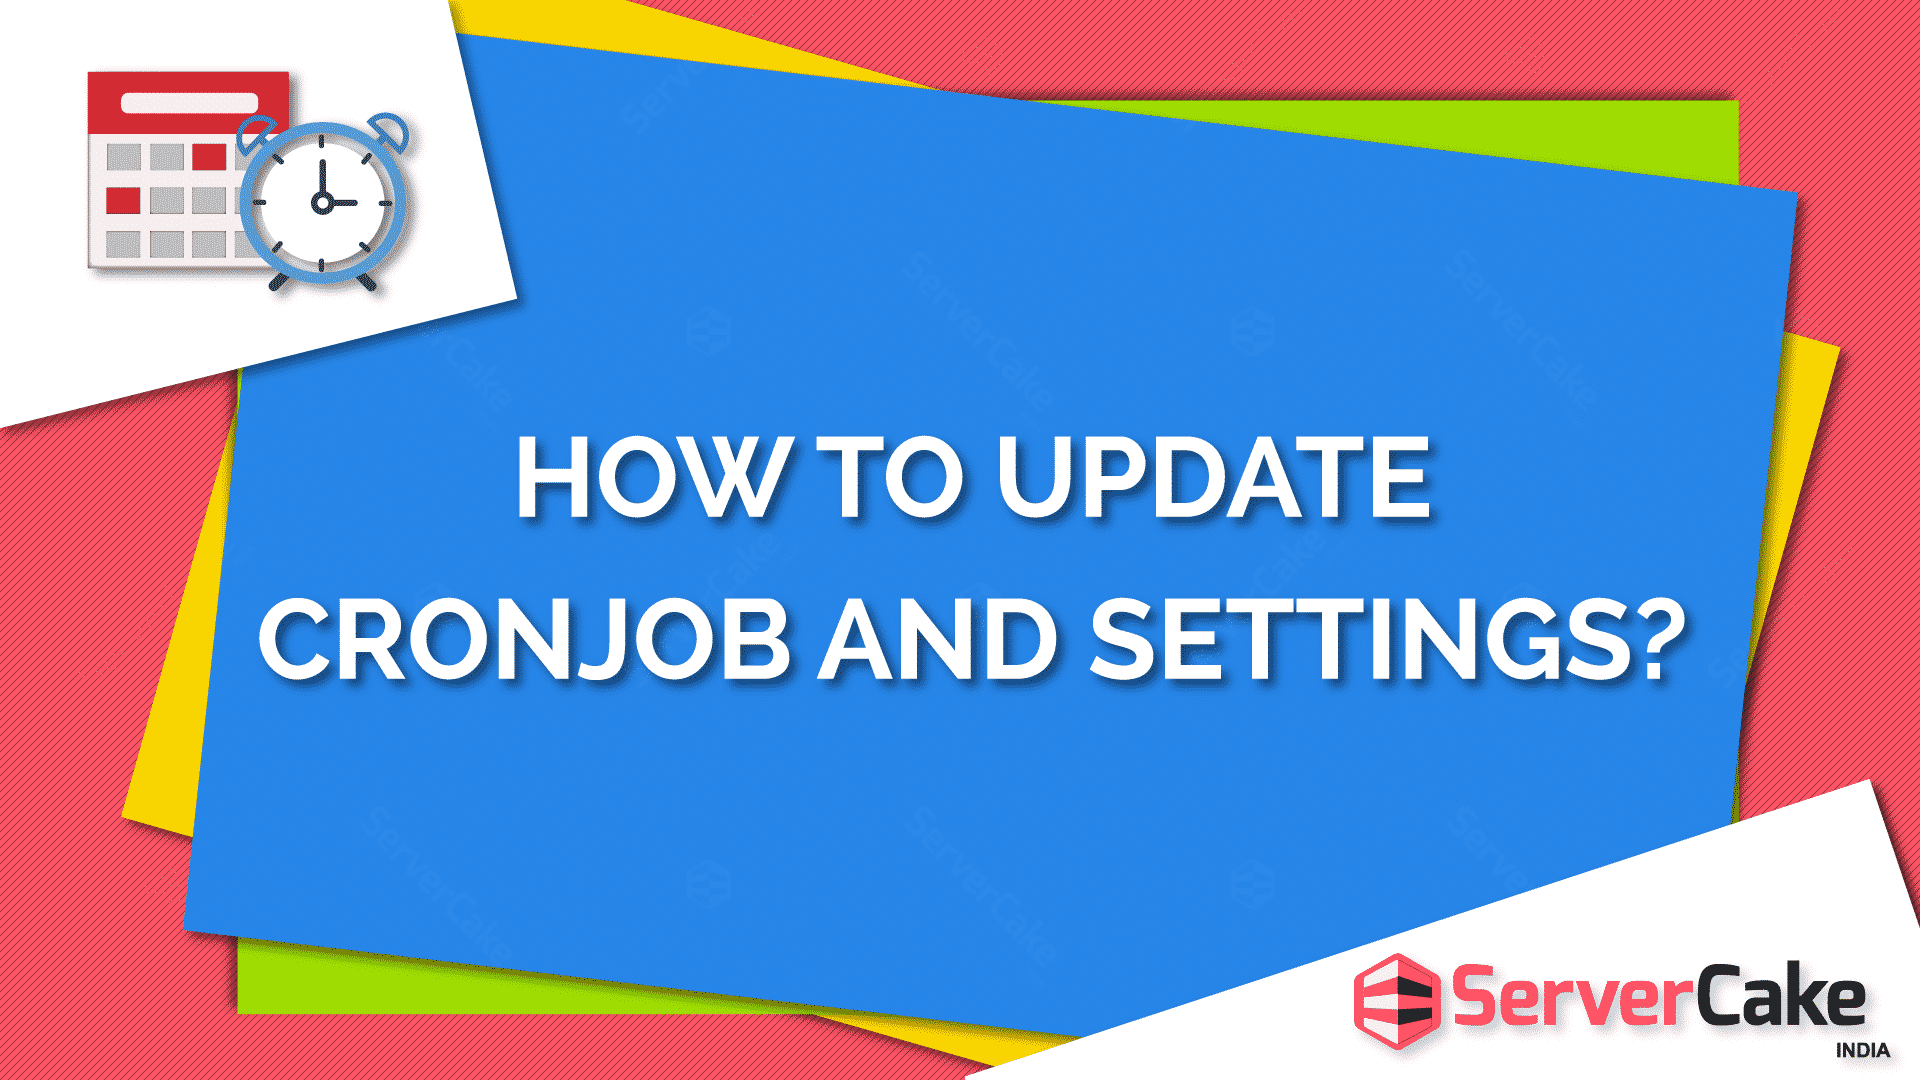 How to update Cron job and settings